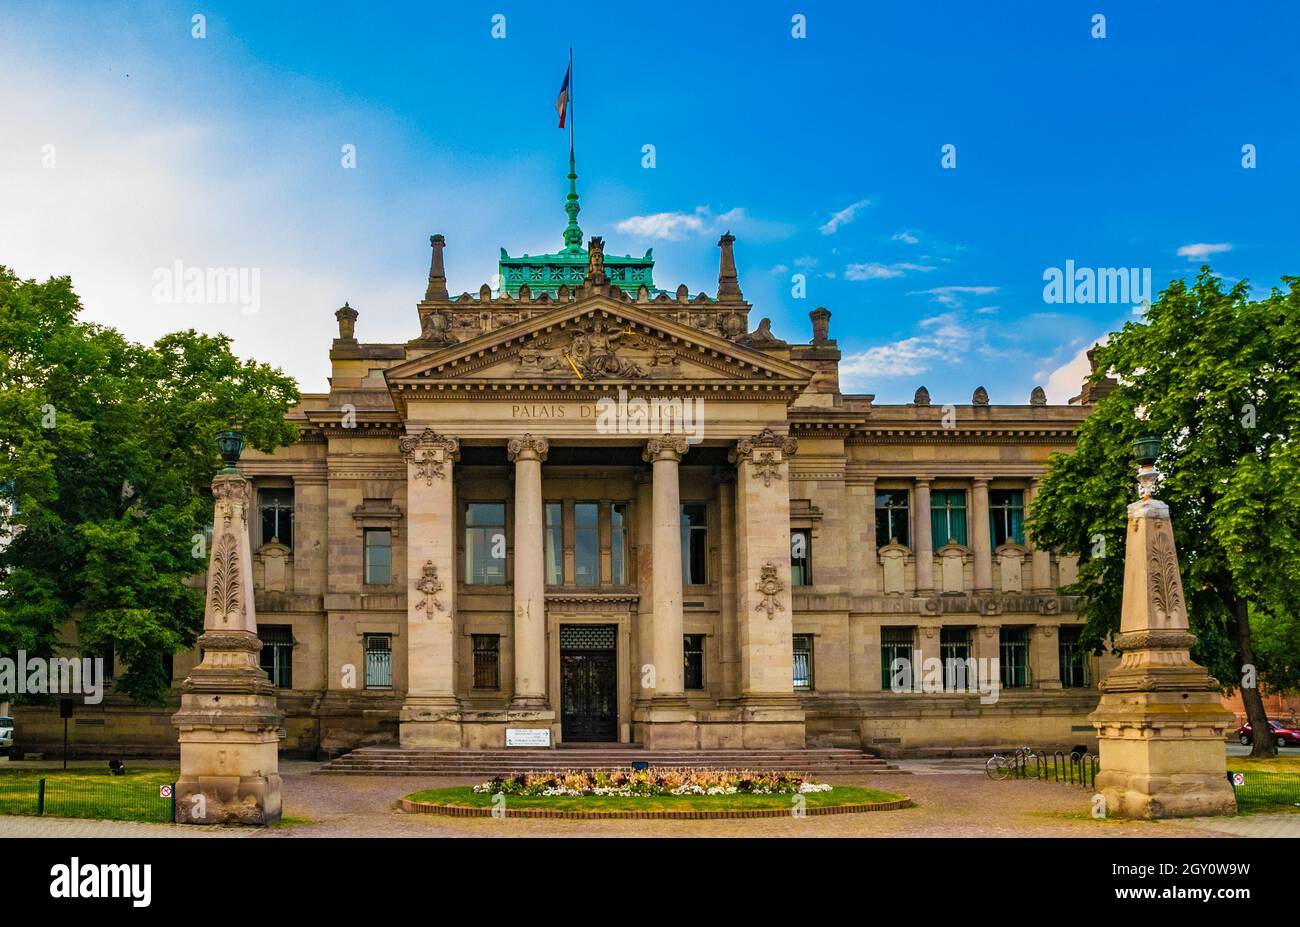 Great panoramic view of the Palais de Justice of Strasbourg before renovation. It is a large 19th-century neo-Greek building in the Tribunal quarter... Stock Photo